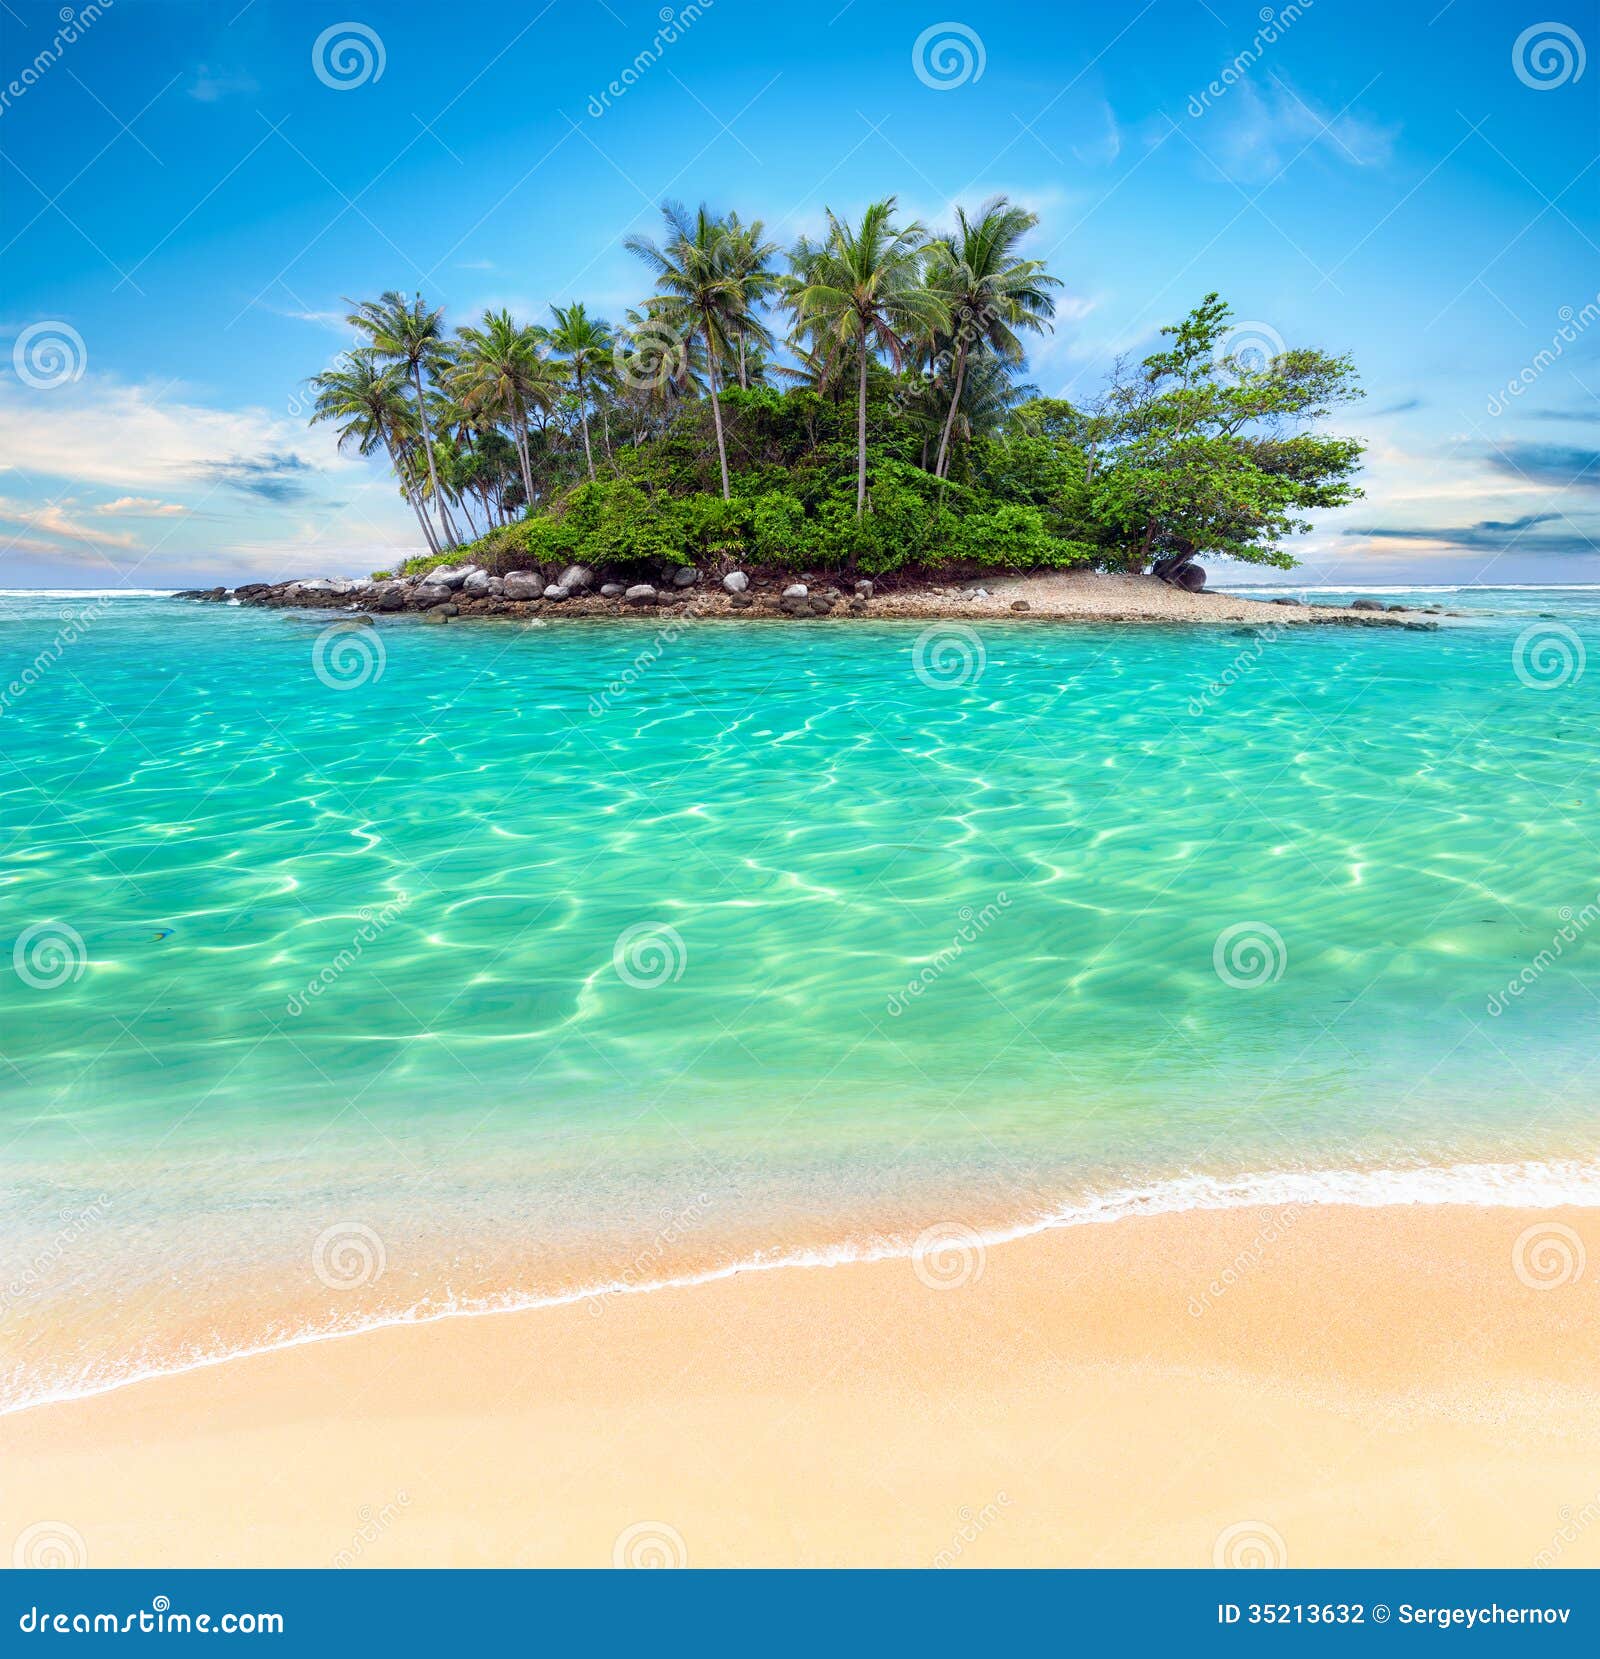 Tropical Island And Sand Beach Exotic Travel Background ...